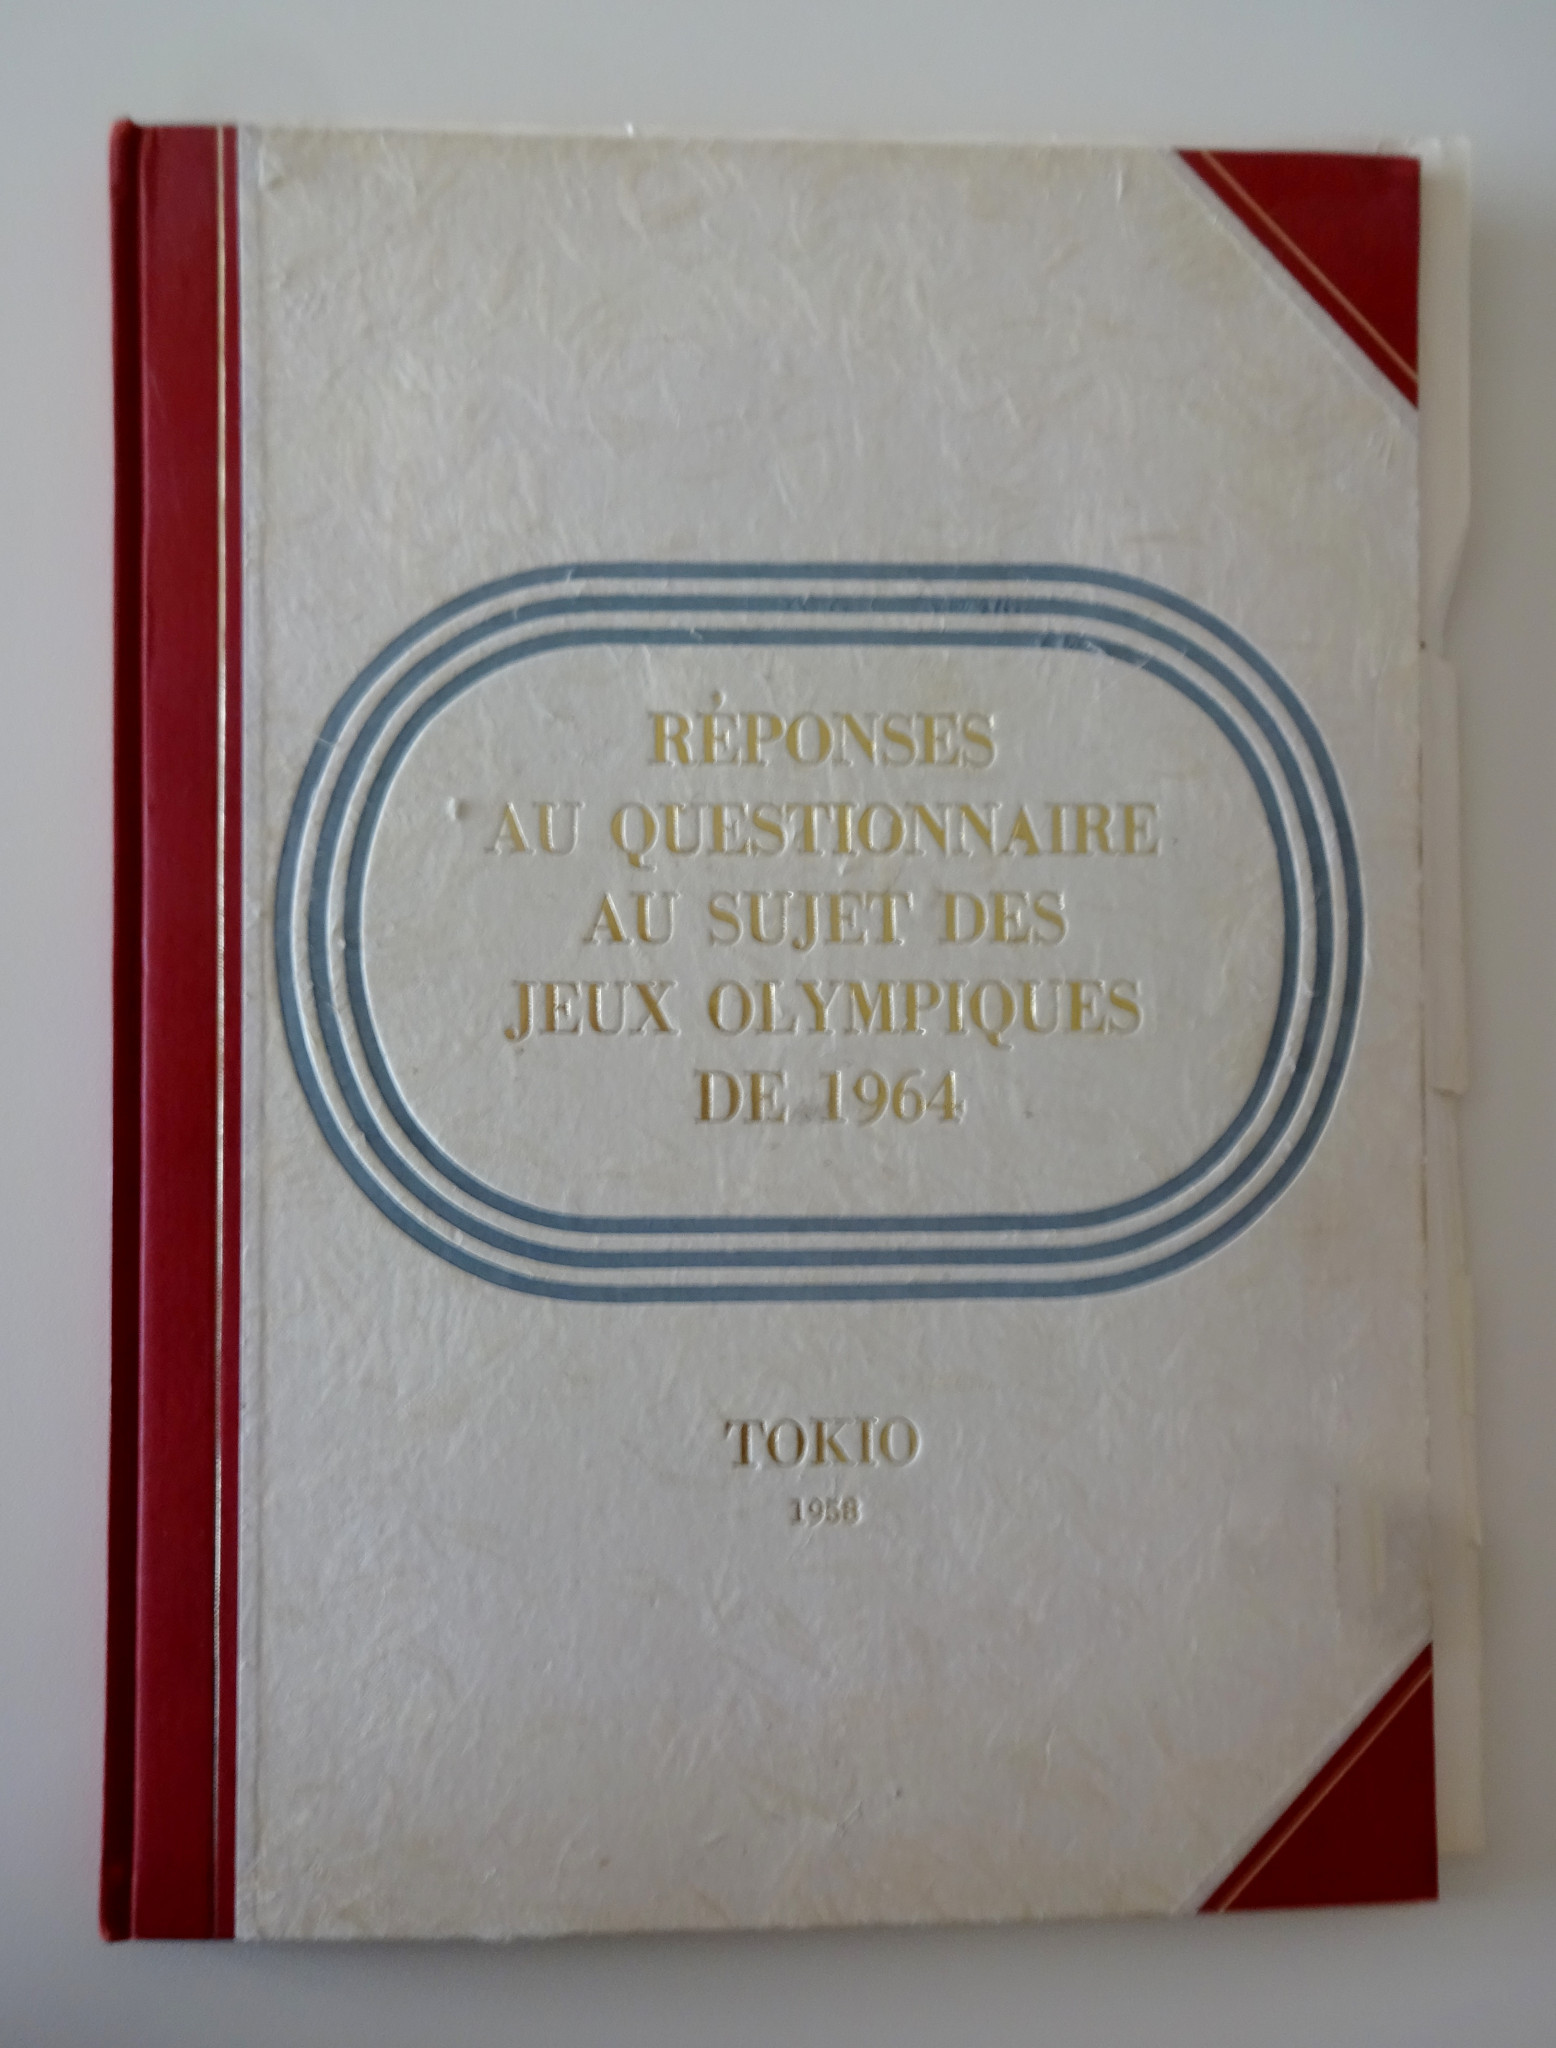 The Tokyo 1964 dossier is kept at the Olympic Studies Centre in Lausanne ©ITG